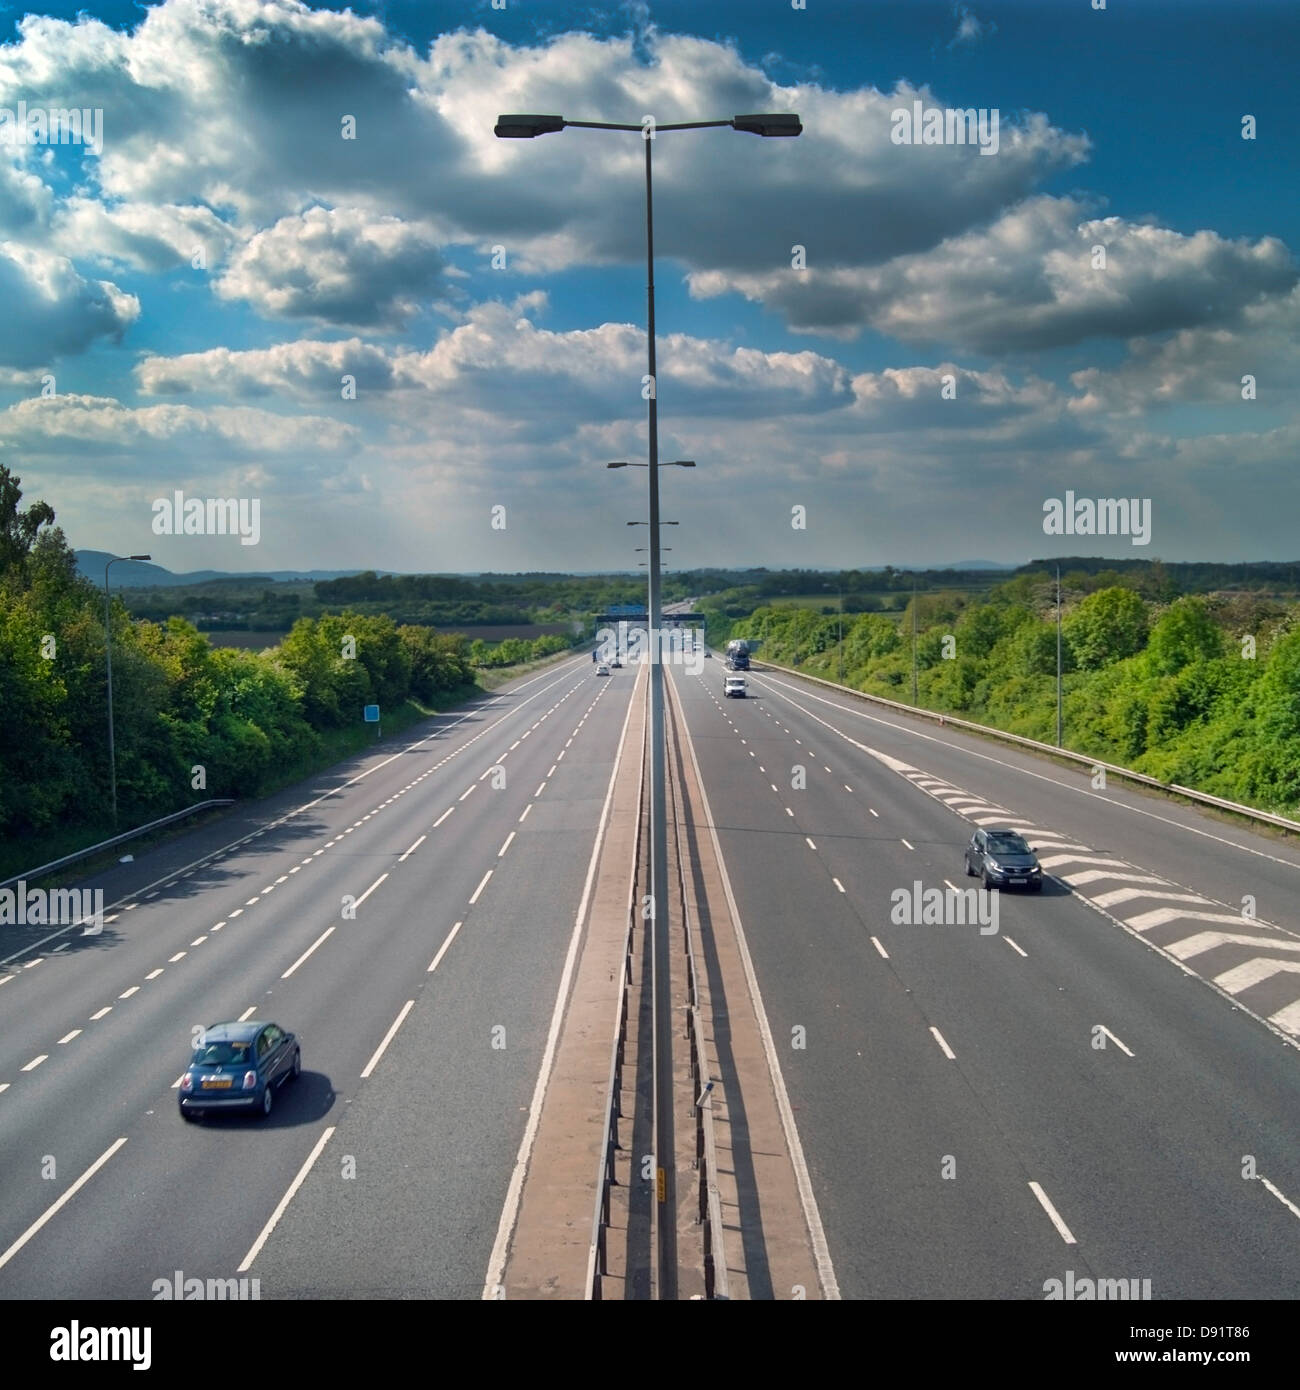 Lighting in the middle of a wide empty motorway. Stock Photo